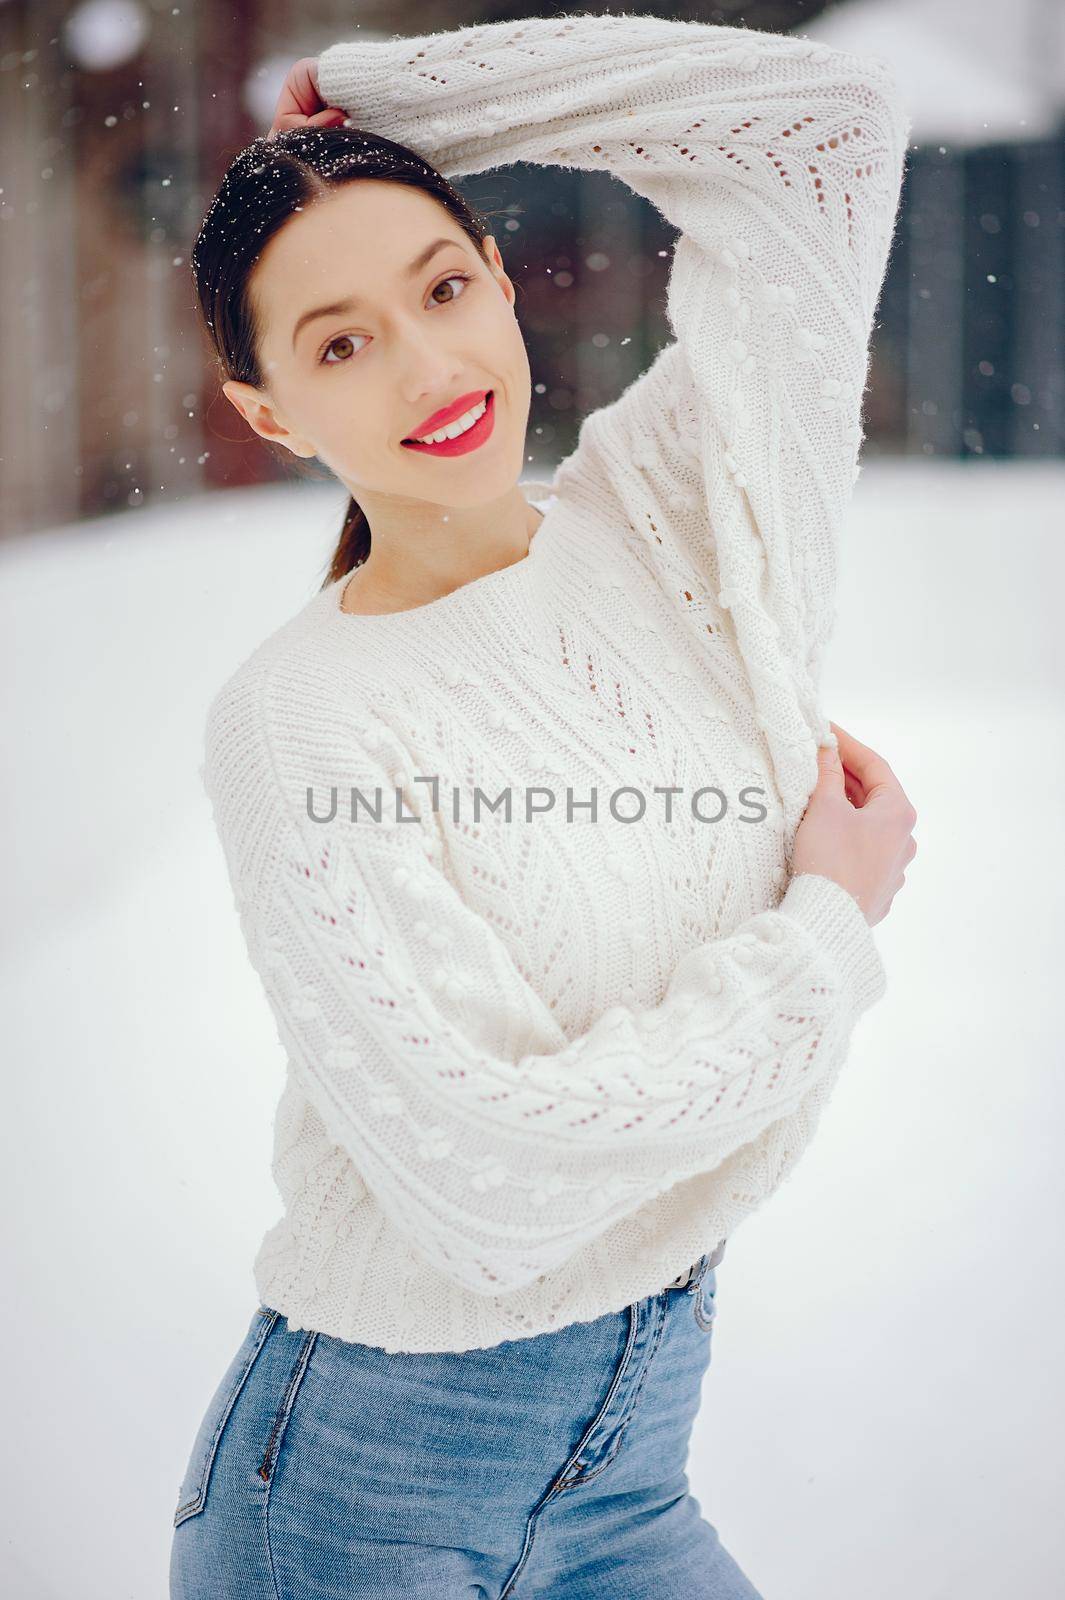 Young girl in a white sweater standing in a winter park by prostooleh